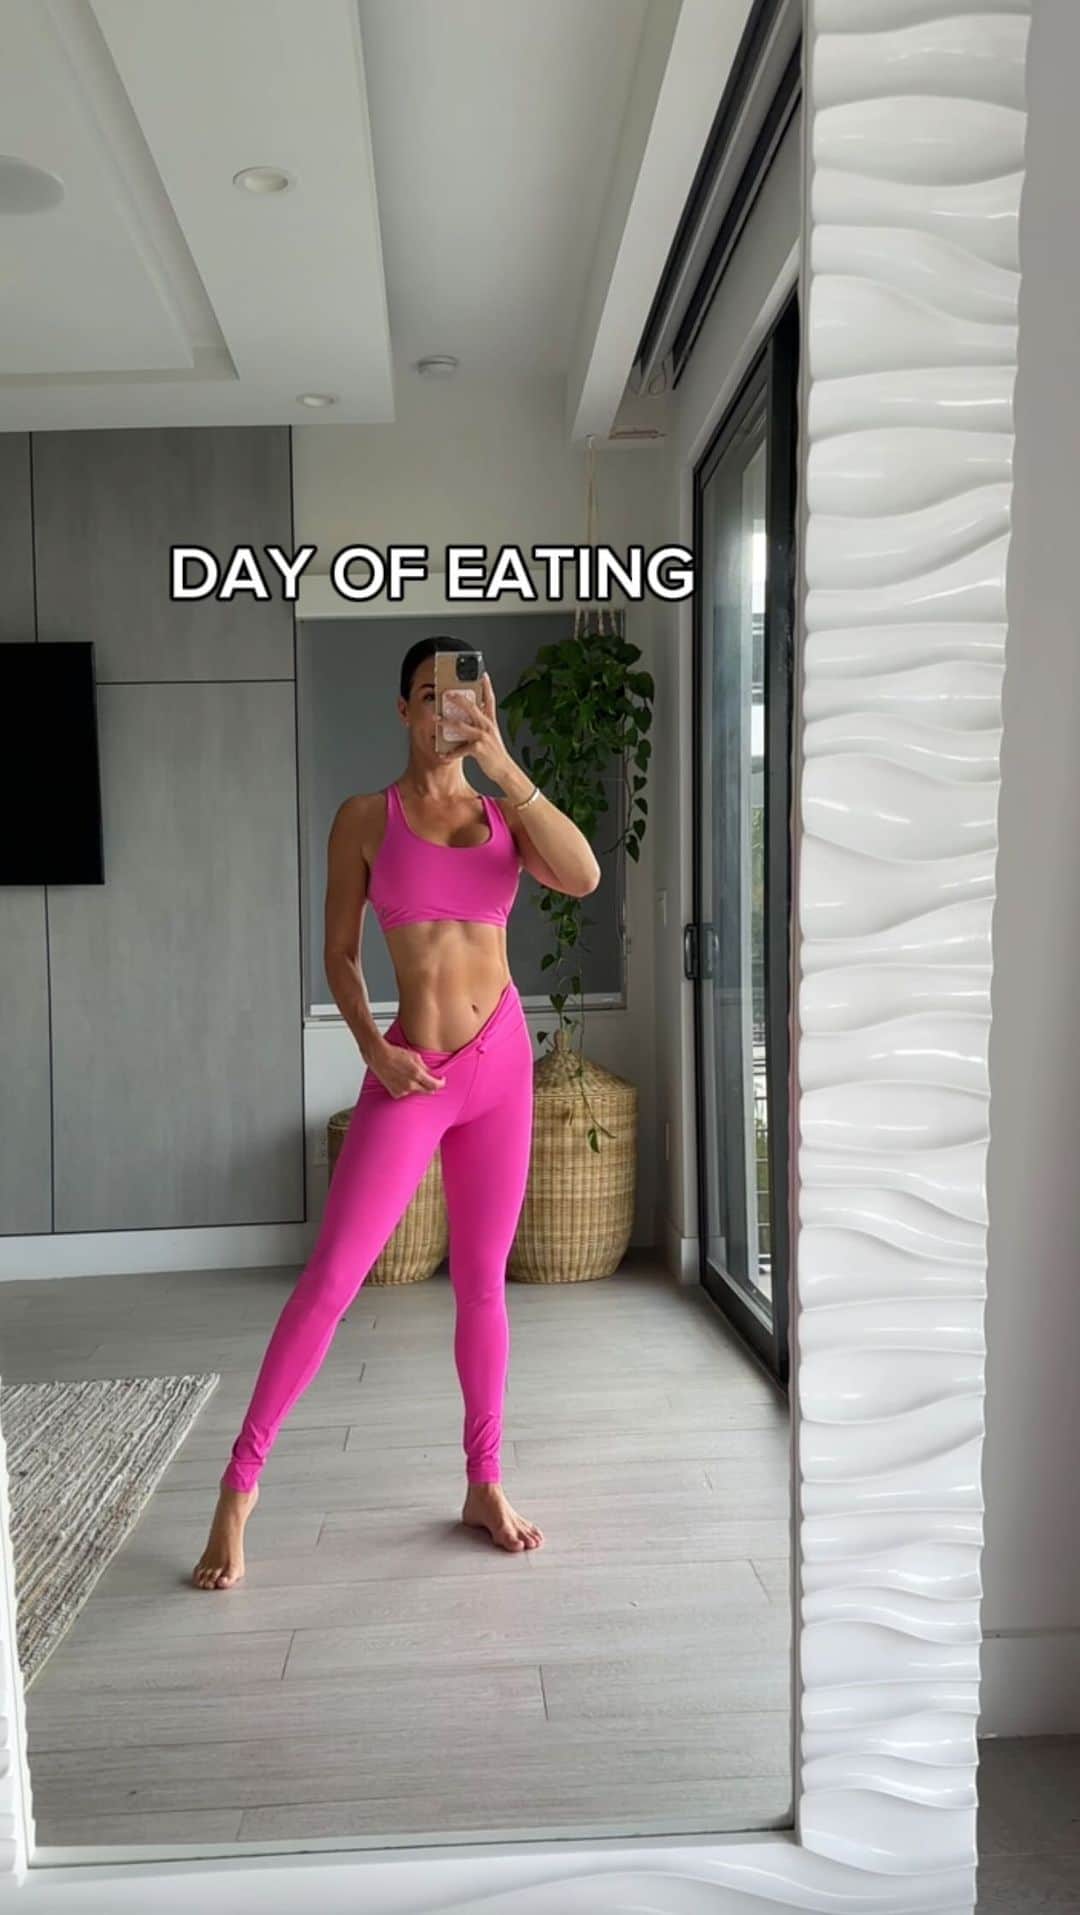 Ainsley Rodriguezのインスタグラム：「EAT IN A DAY! Quick & easy meals  Here’s an example but to be honest with you every day is SO different! Some days I eat more and some days I eat less just based on how hungry or busy I am.  I don’t personally count macros or track my calories because I don’t feel like that’s any way to live 🤷🏻‍♀️ I’ve learned to listen to my body when it comes to fueling it and took a heck of a long time to get there but I’m so grateful for it!  . #healthyfood #whatieatinaday #fitness #eating day」